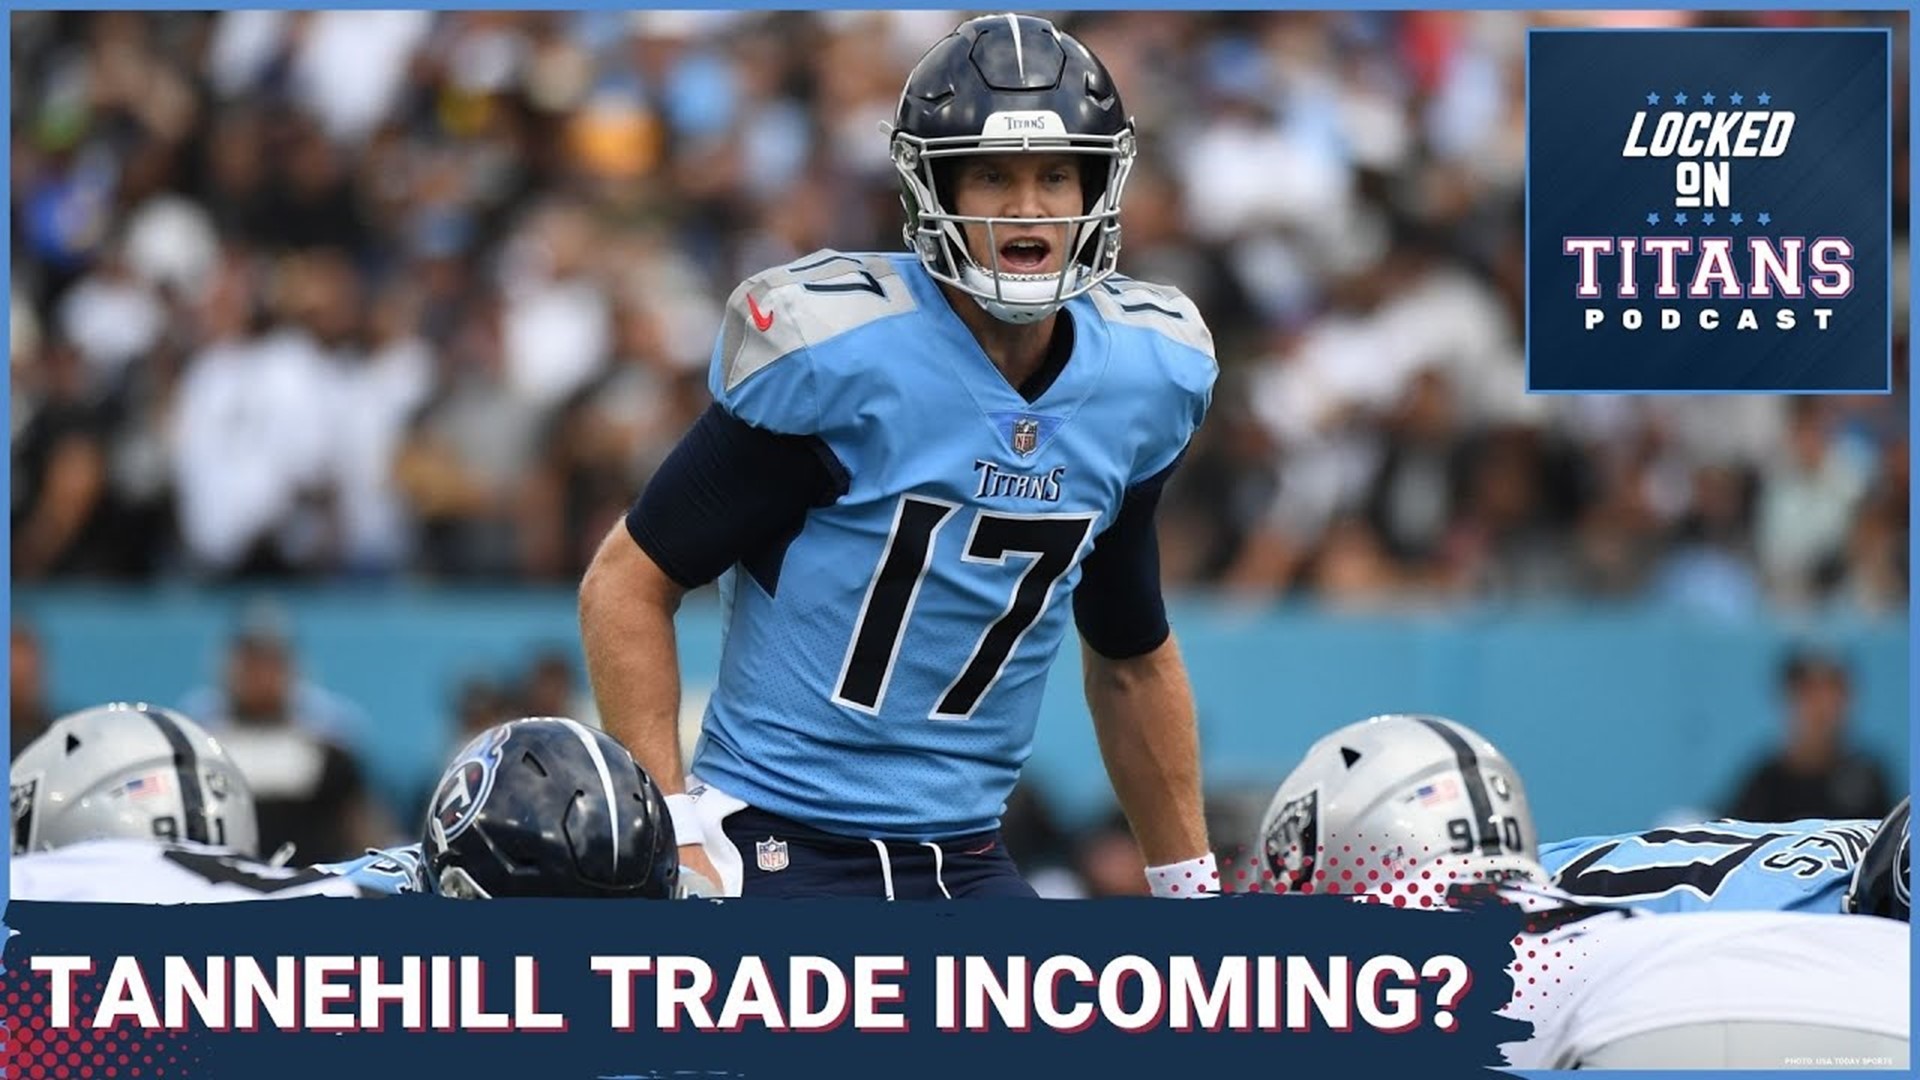 The Tennessee Titans starting quarterback Ryan Tannehill has been in trade rumors all offseason and while those have quieted, change could be coming